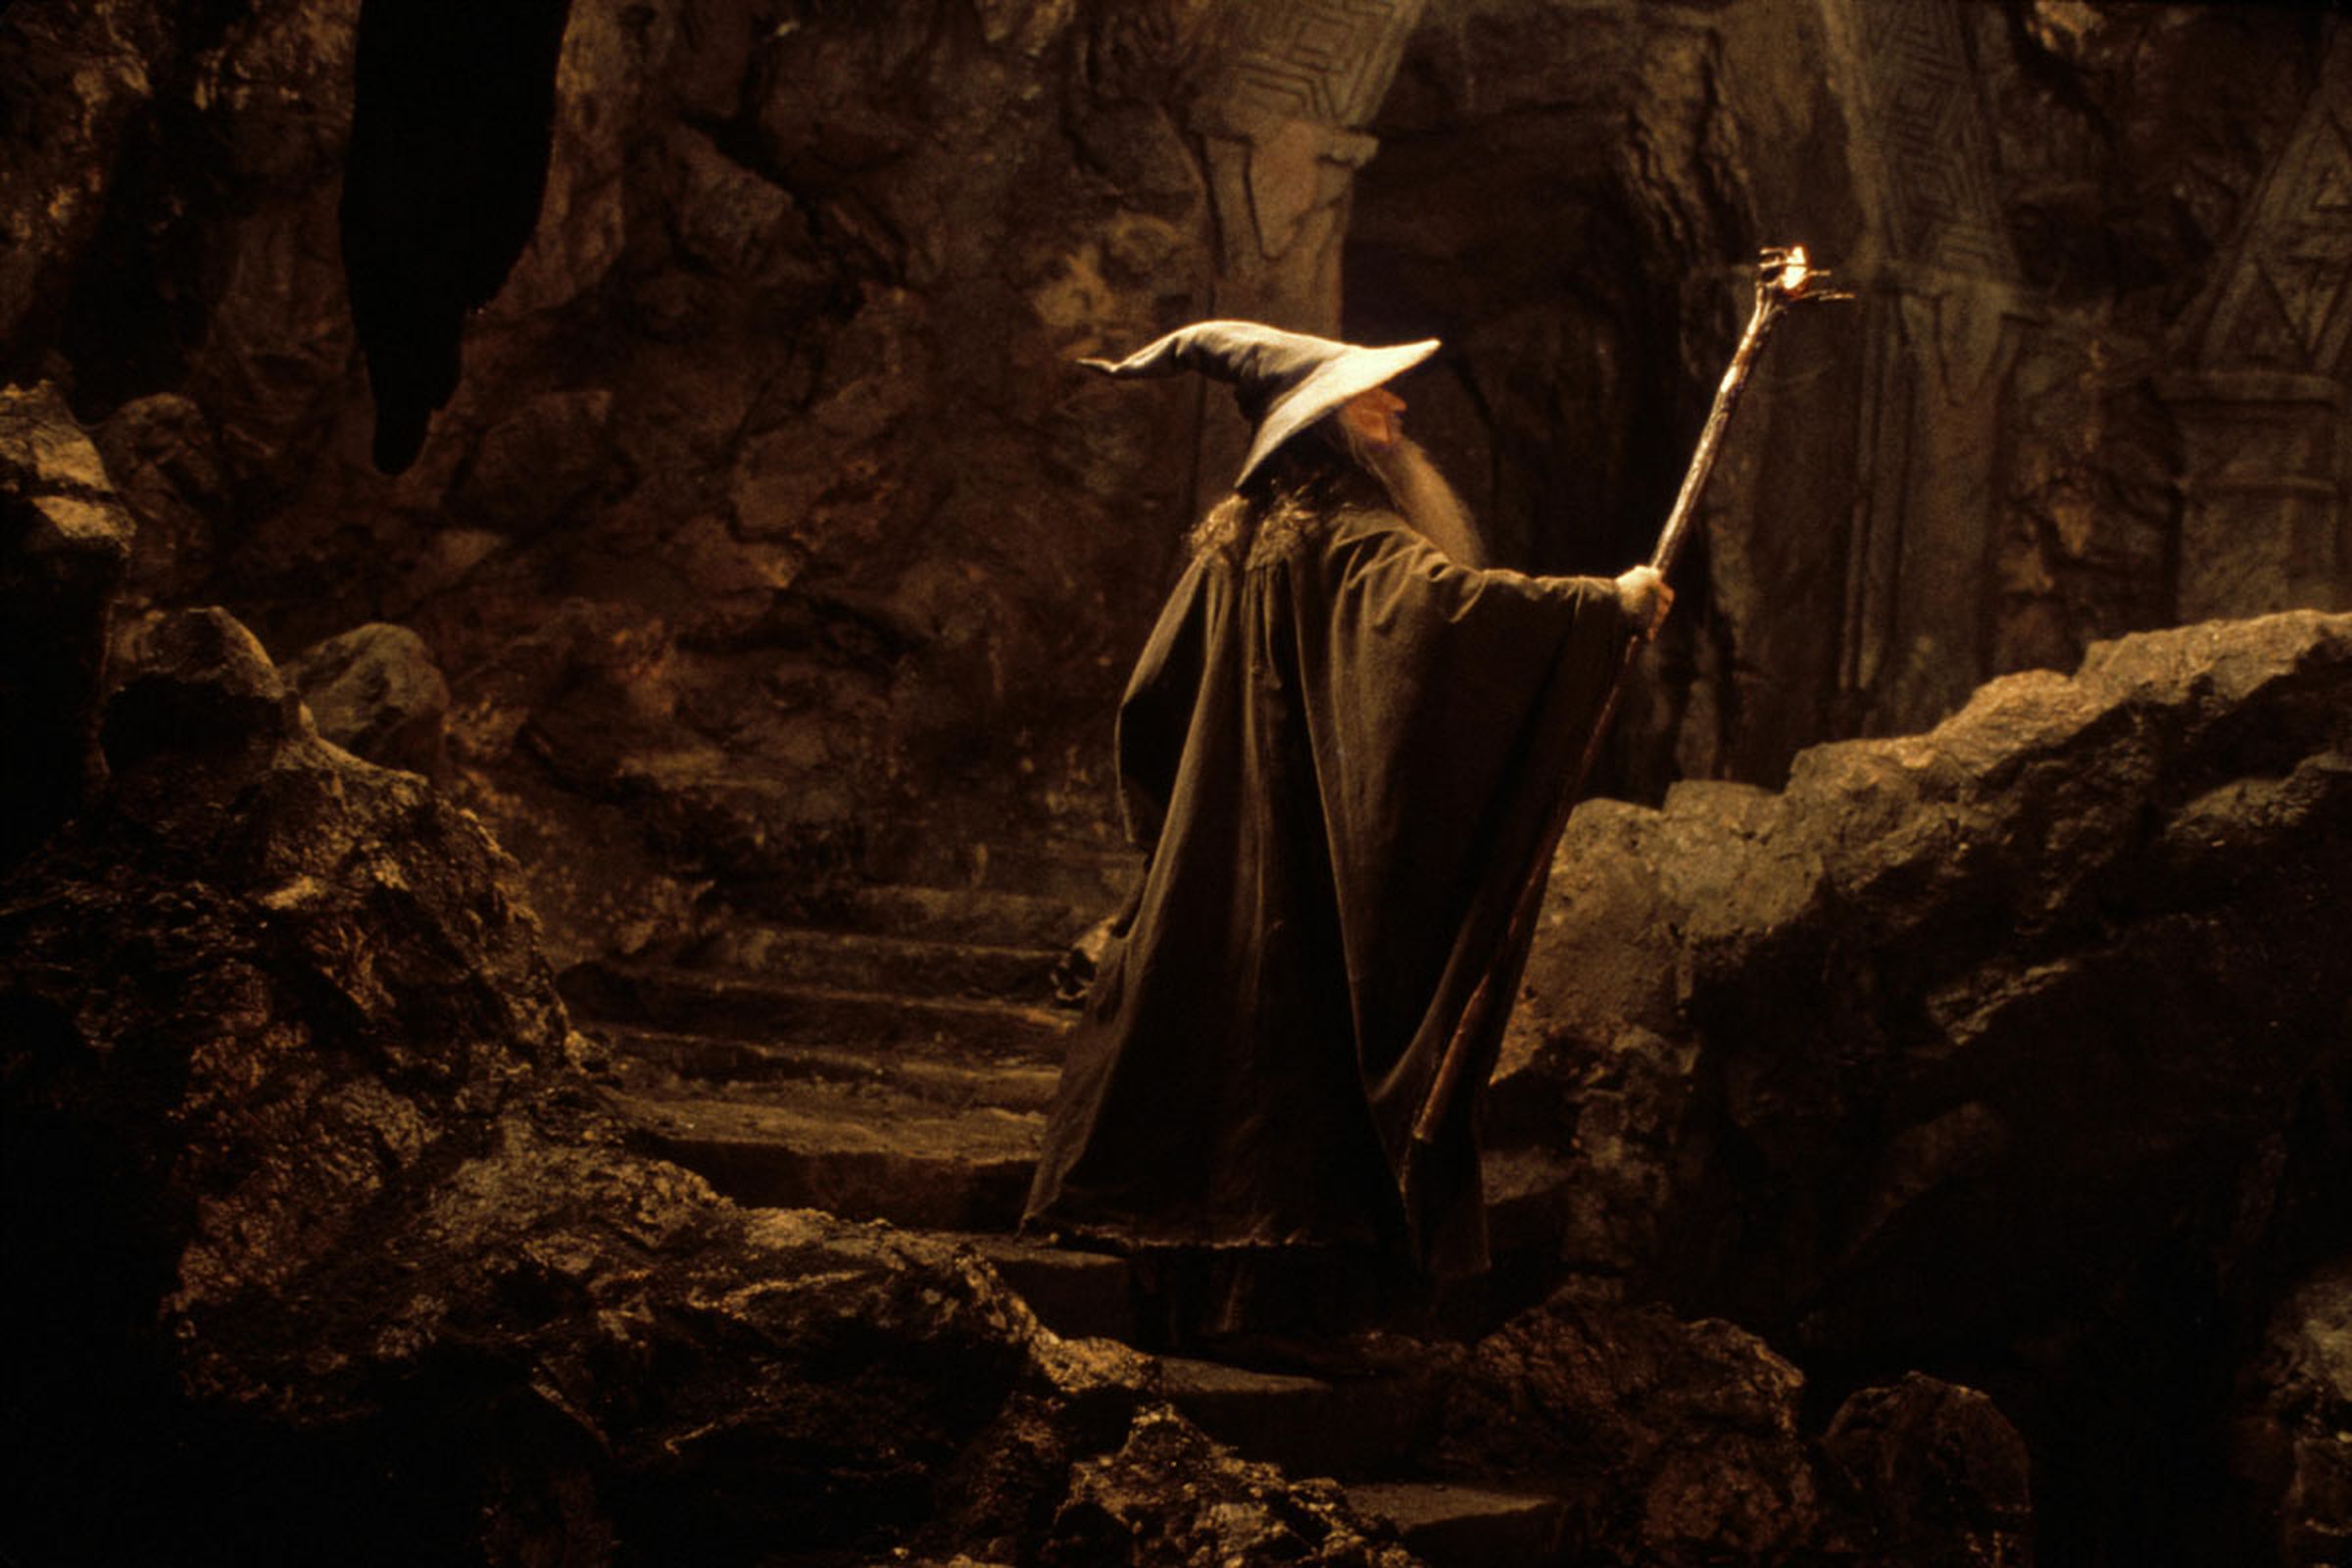 Gandalf the Grey garbed in a gray robe holding up his stave in a dimly lit cave